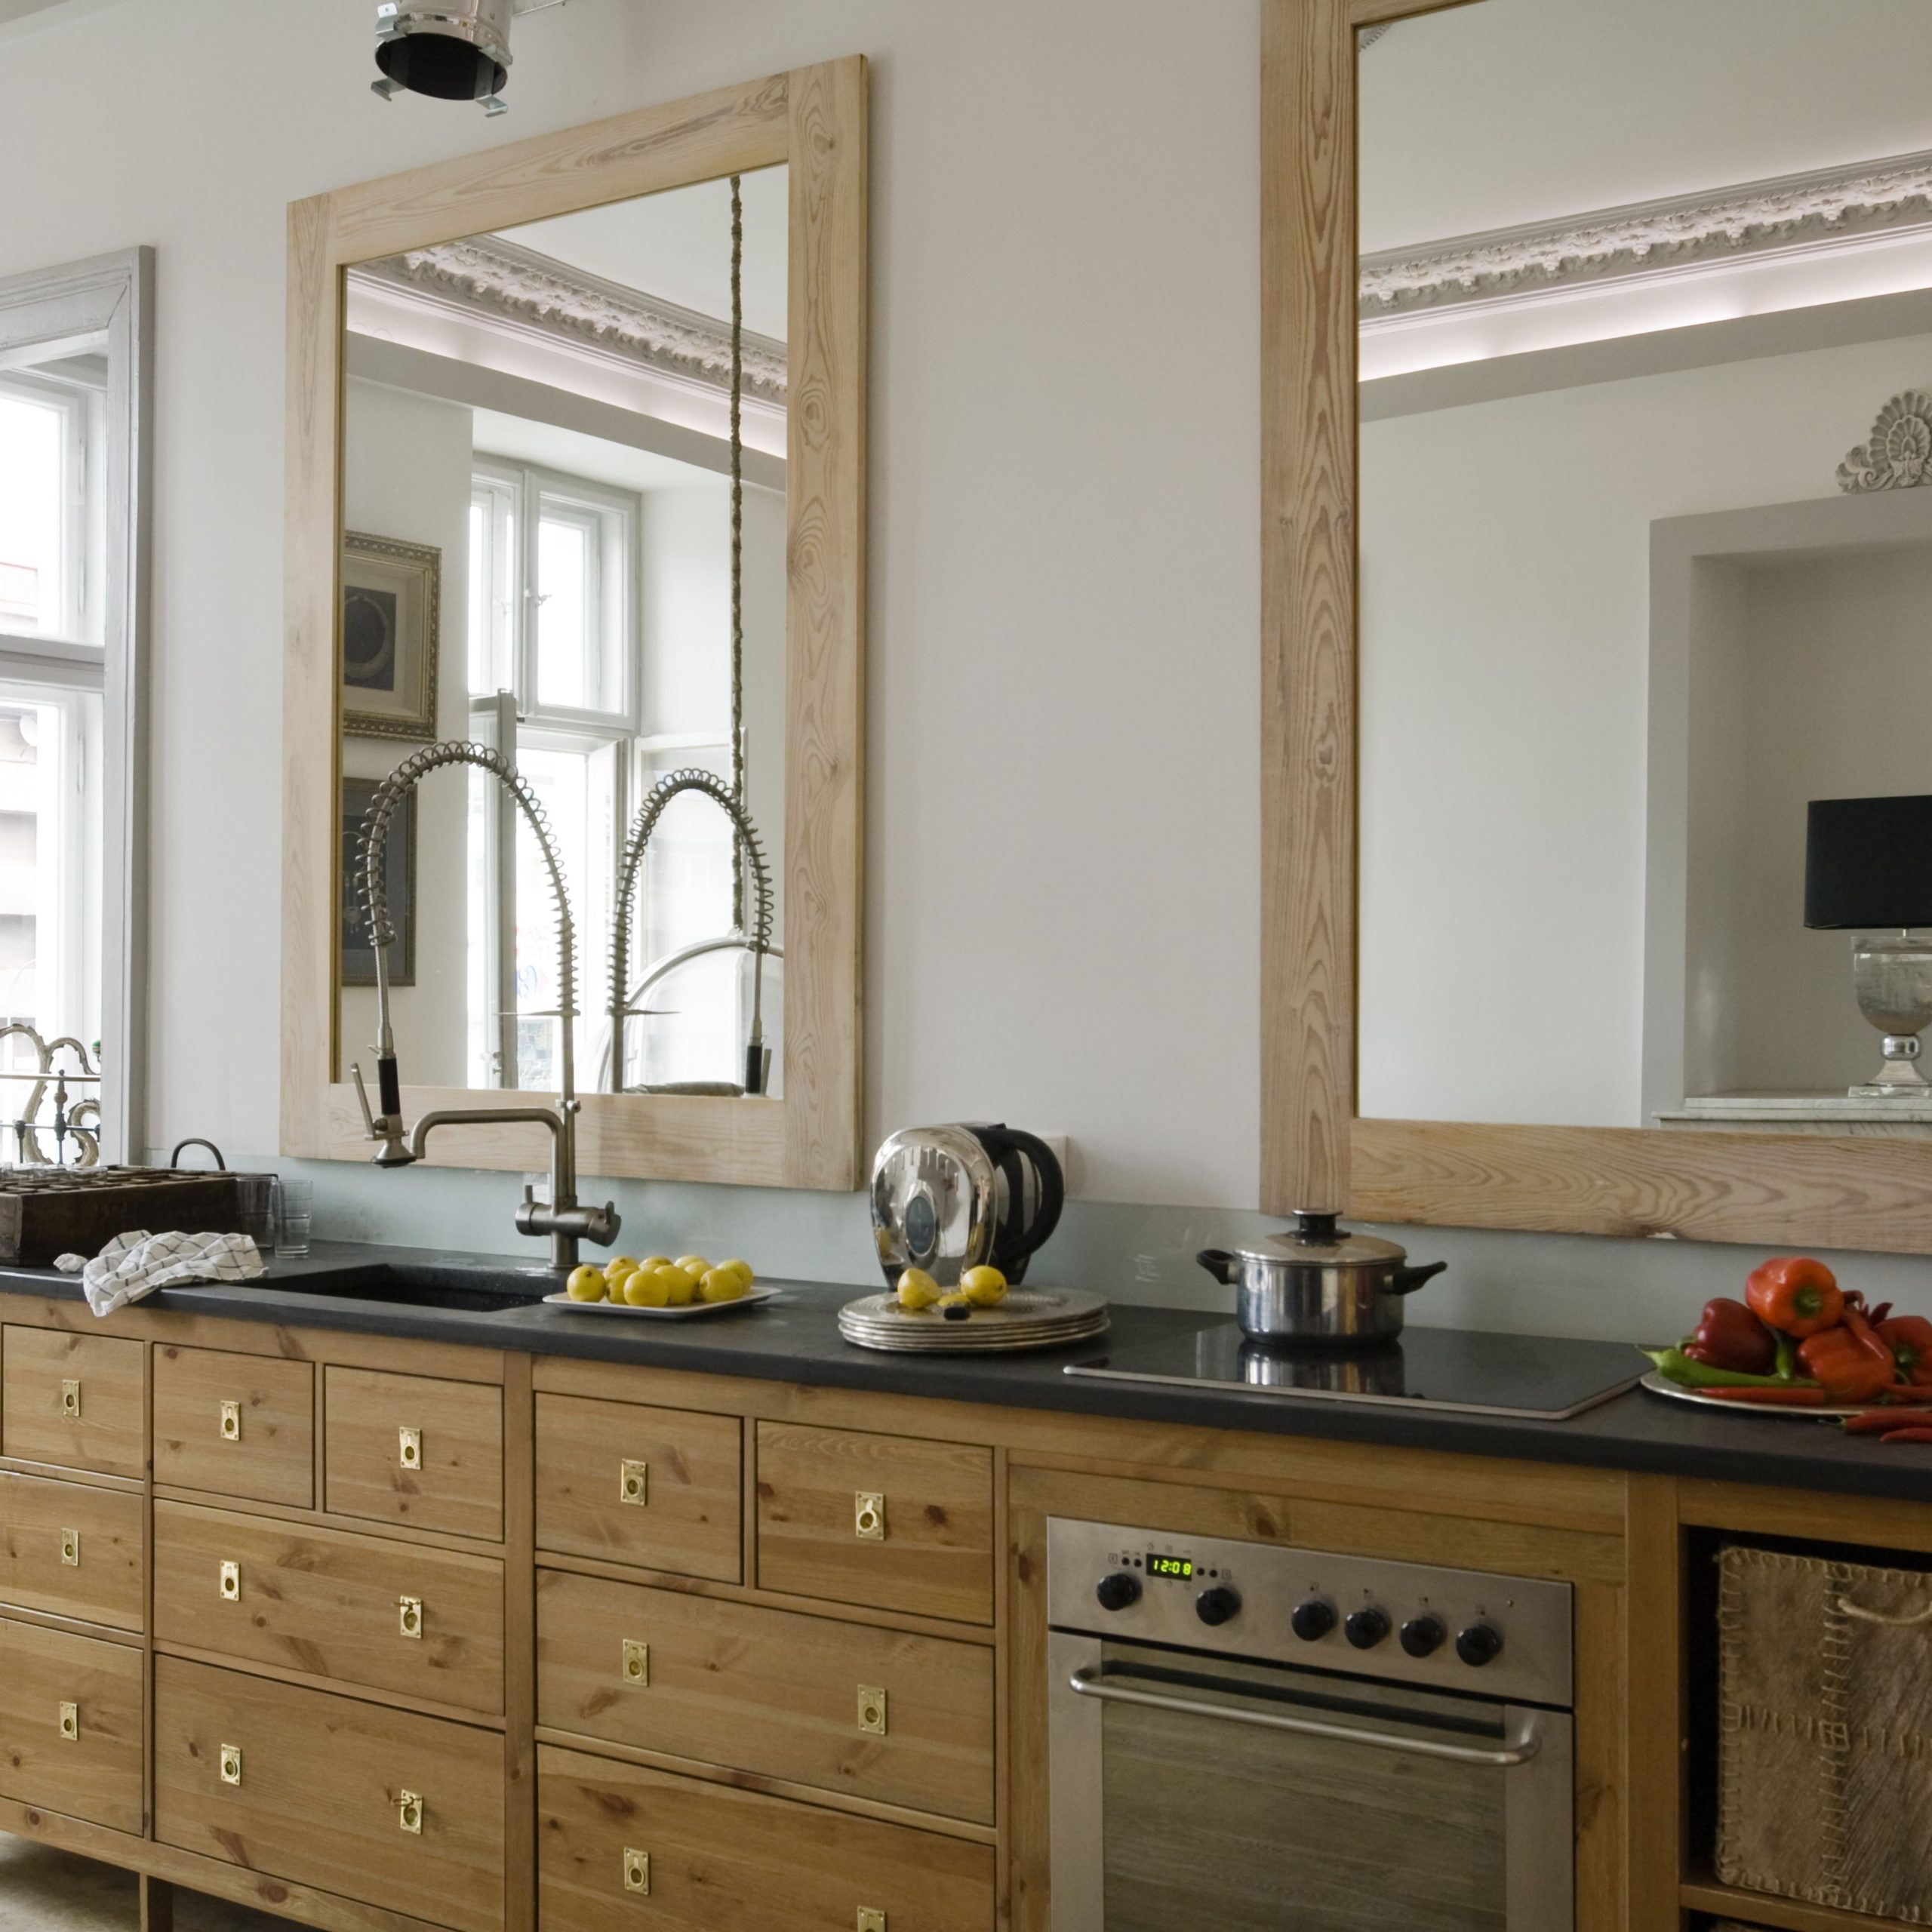 Mirrors in kitchens. scaled 80+ Unusual Kitchen Design Ideas for Small Spaces - 38